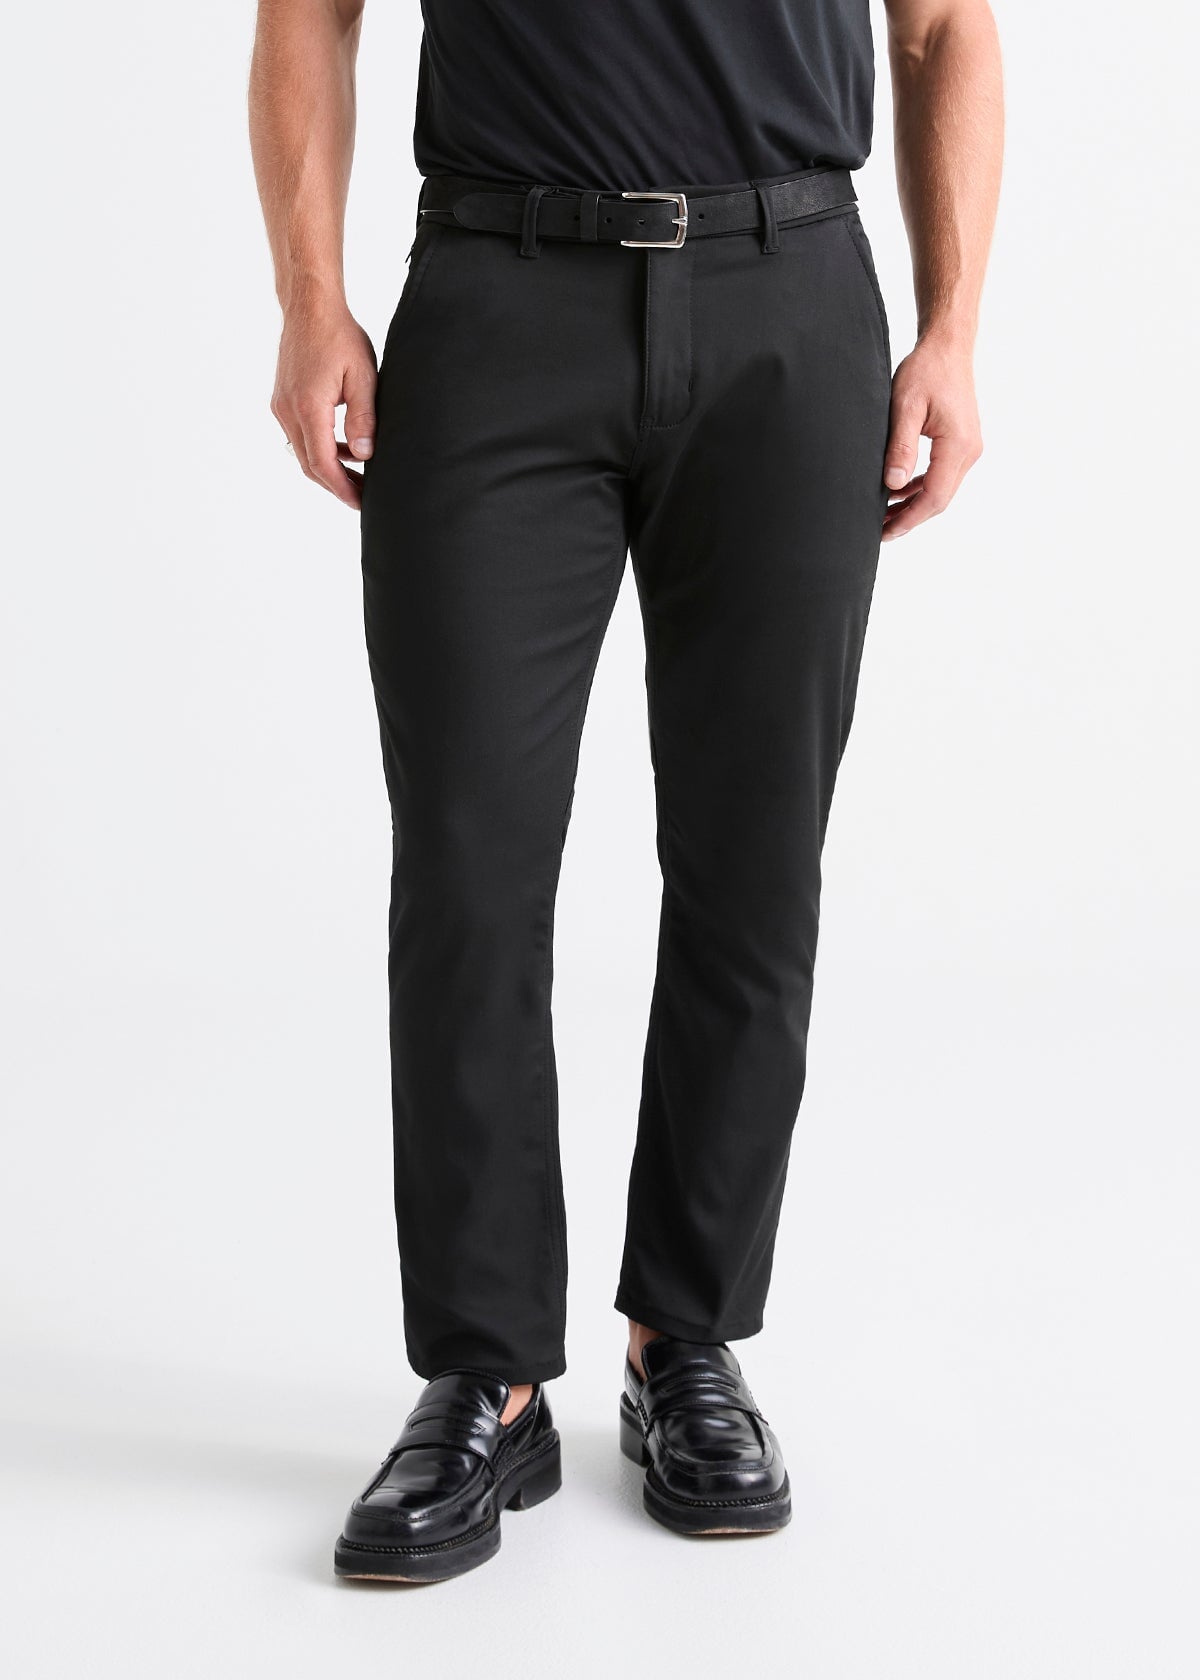 mens black relaxed stretch fit dress pant front